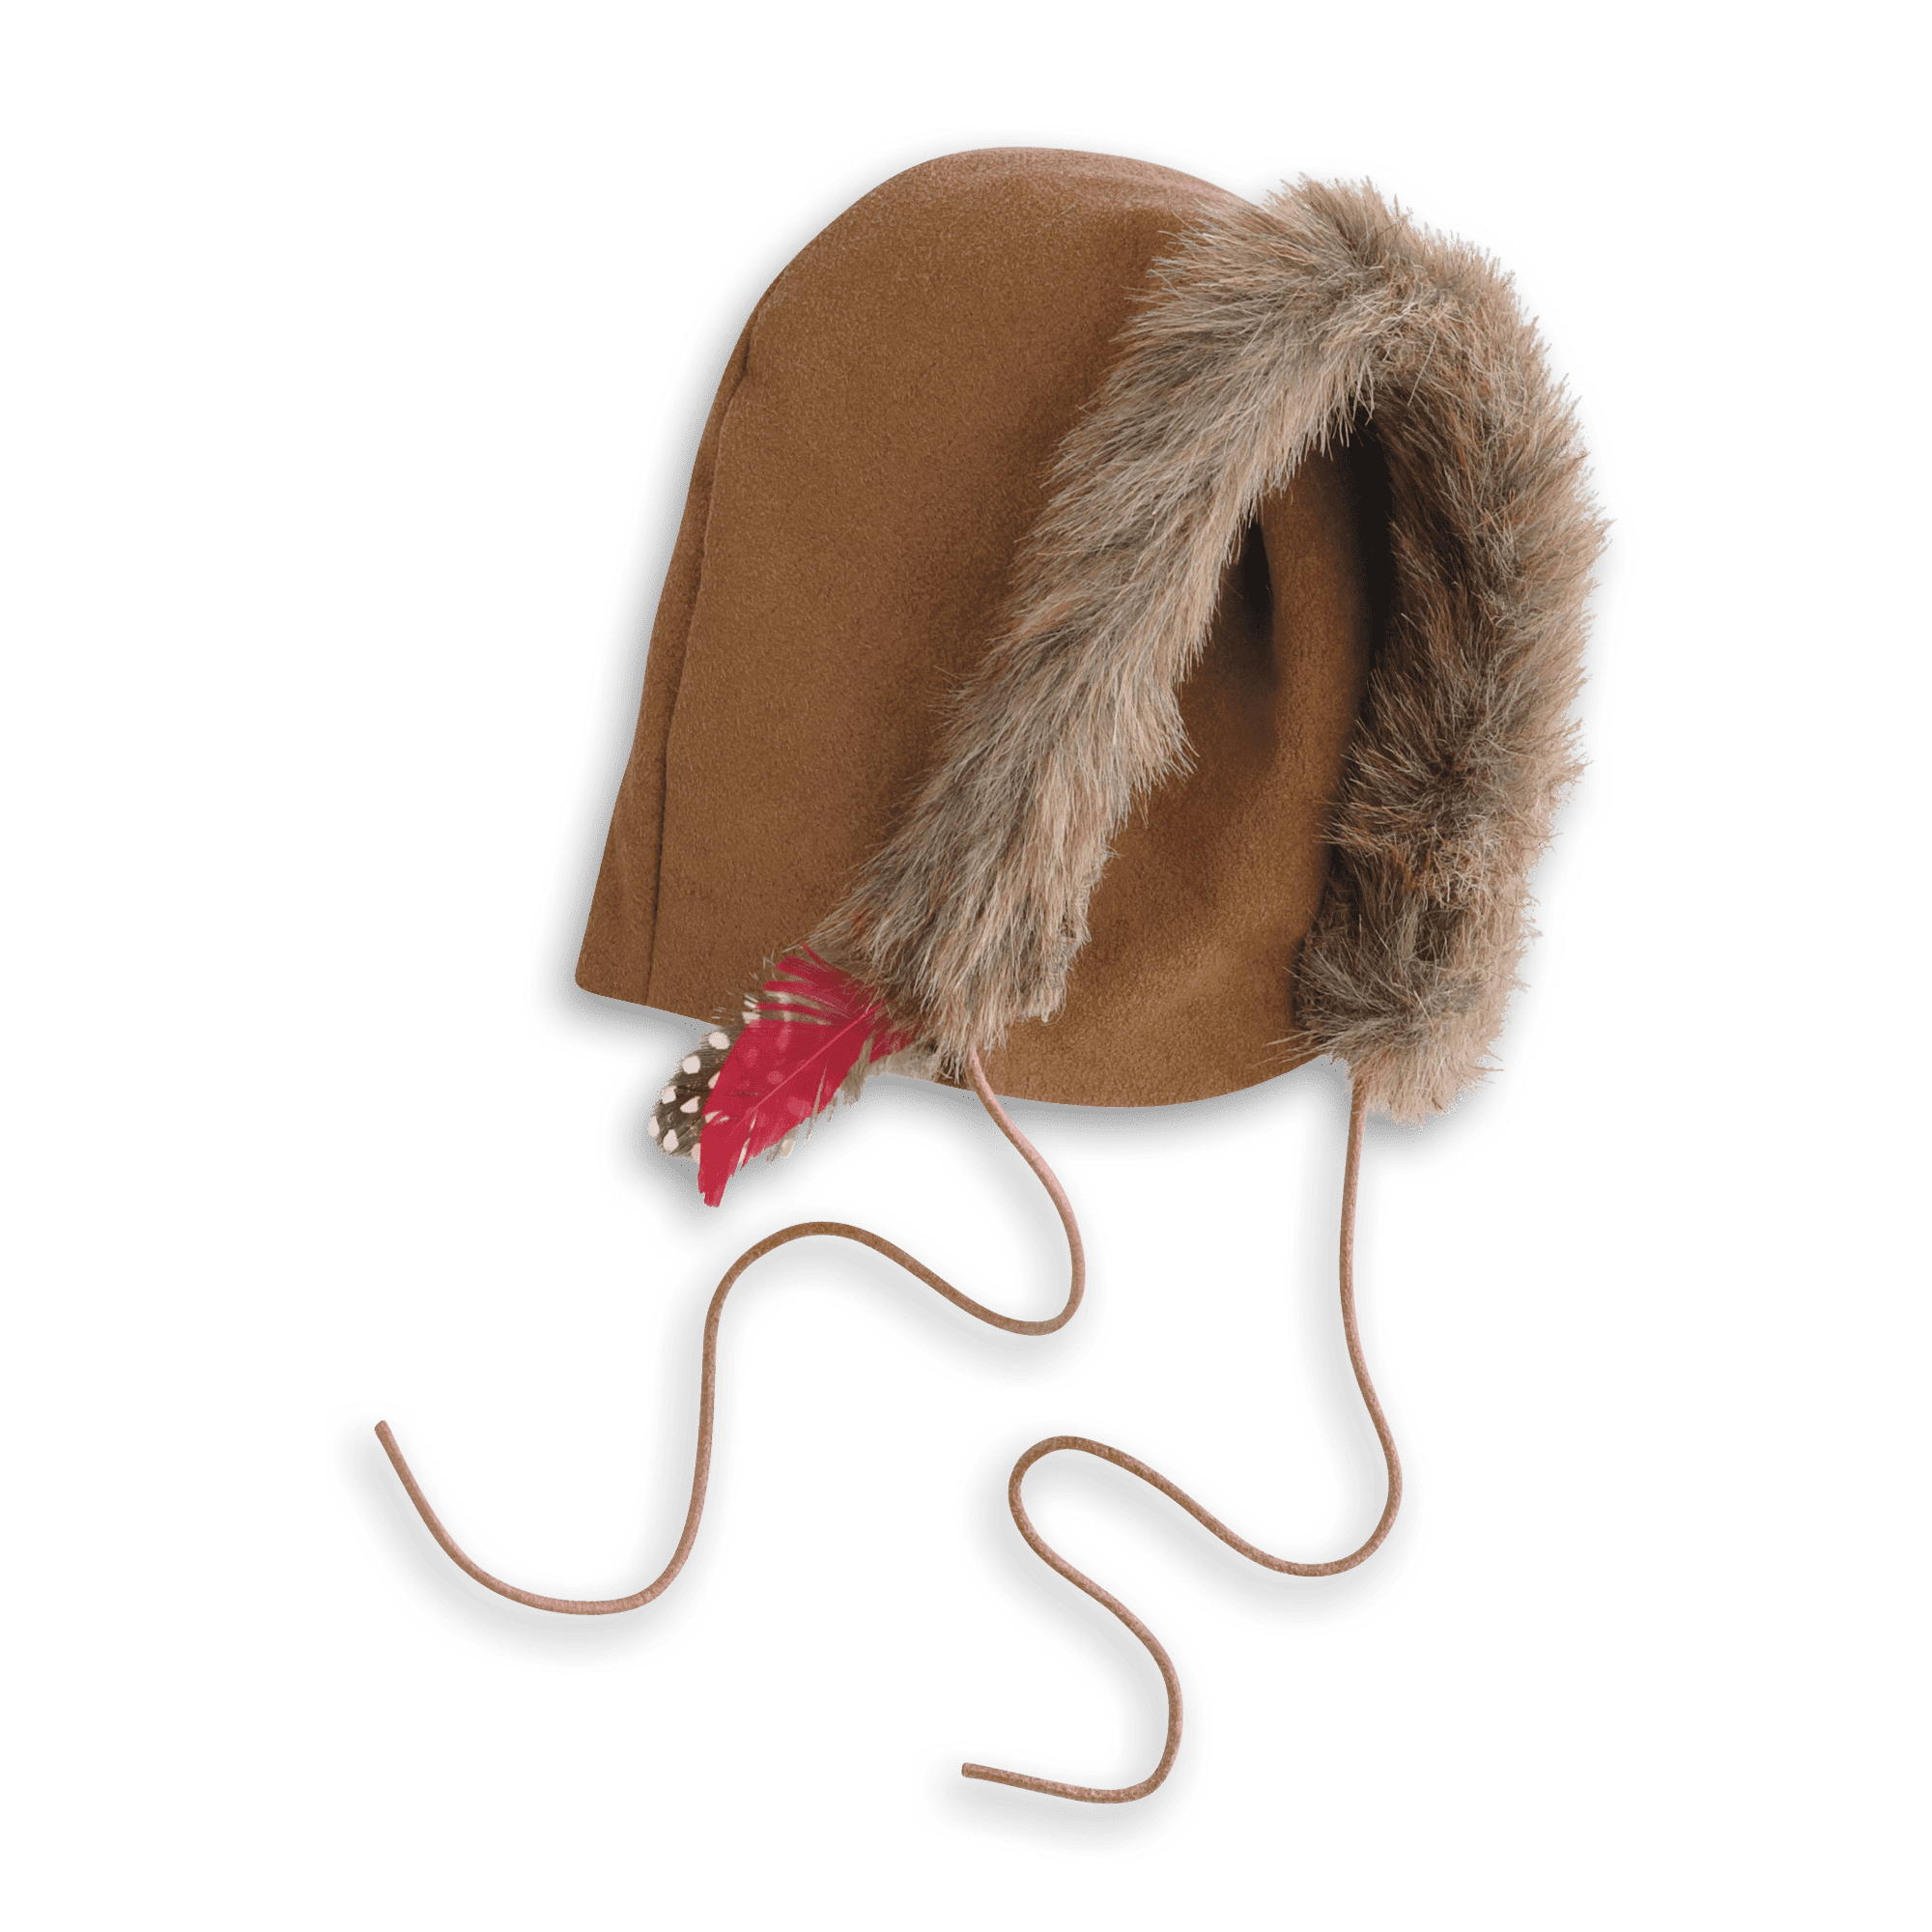 Kaya’s™ Winter Accessories for 18-inch Dolls